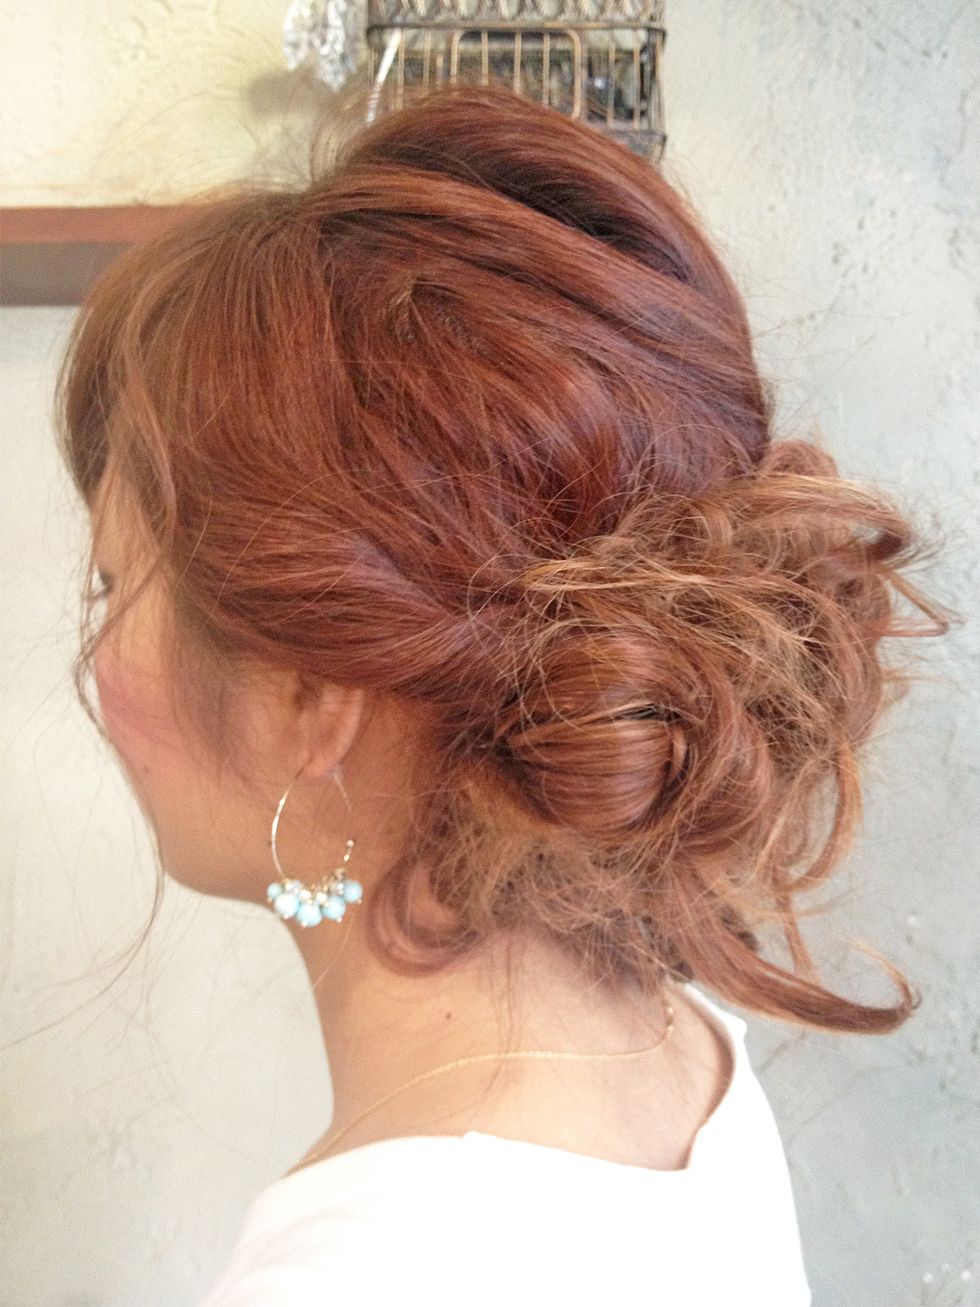 Hair, Hairstyle, Chin, Forehead, Shoulder, Earrings, Jewellery, Style, Bridal accessory, Red hair, 